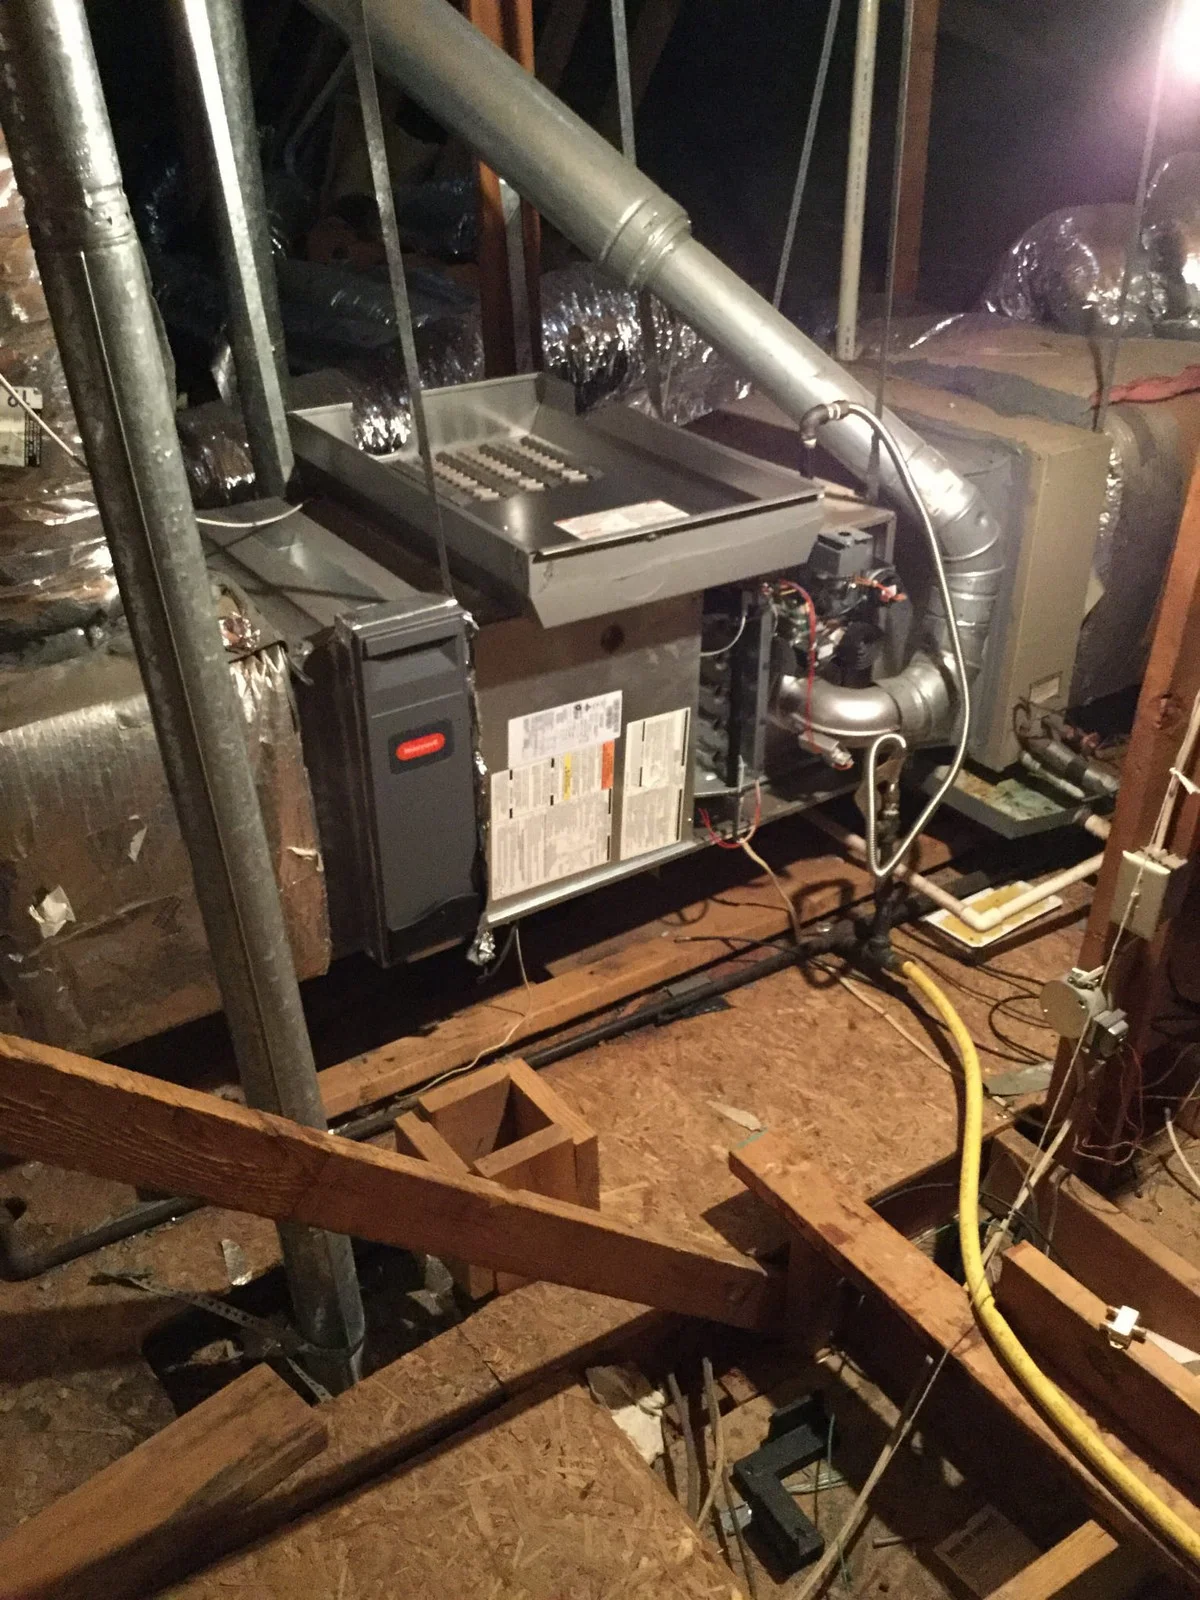 Dallas commercial heater repair services in a commercial utility room.